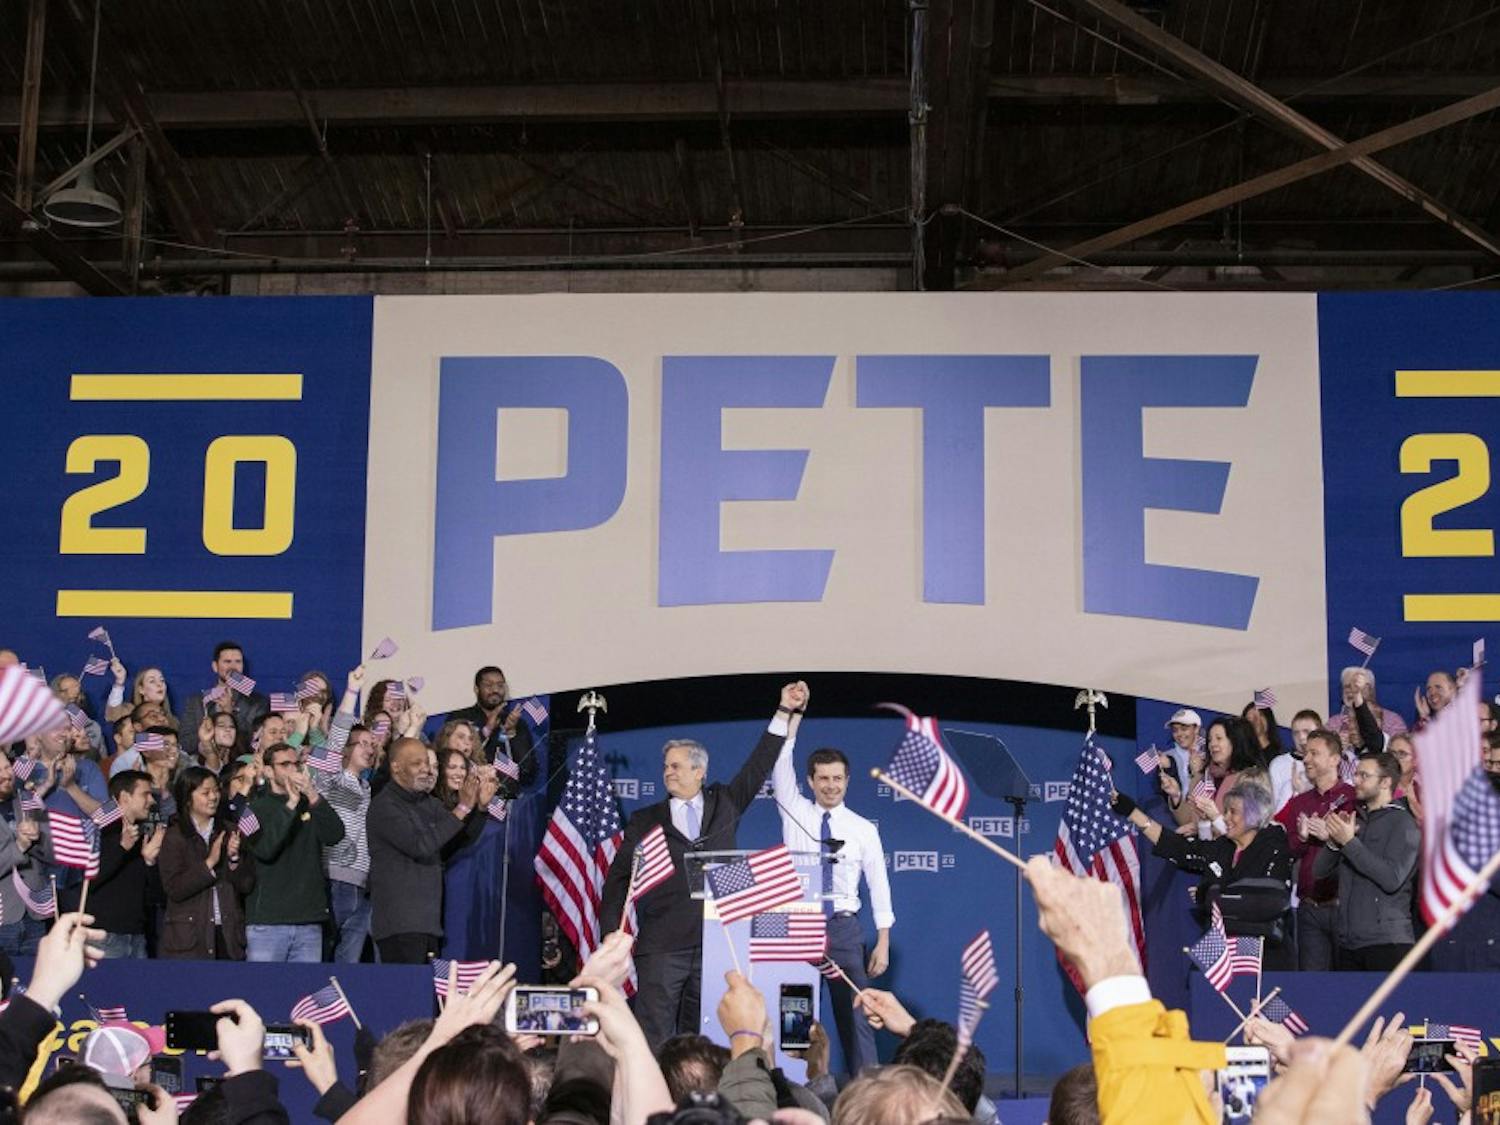 GALLERY: South Bend Mayor Pete Buttigieg officially enters 2020 presidential race